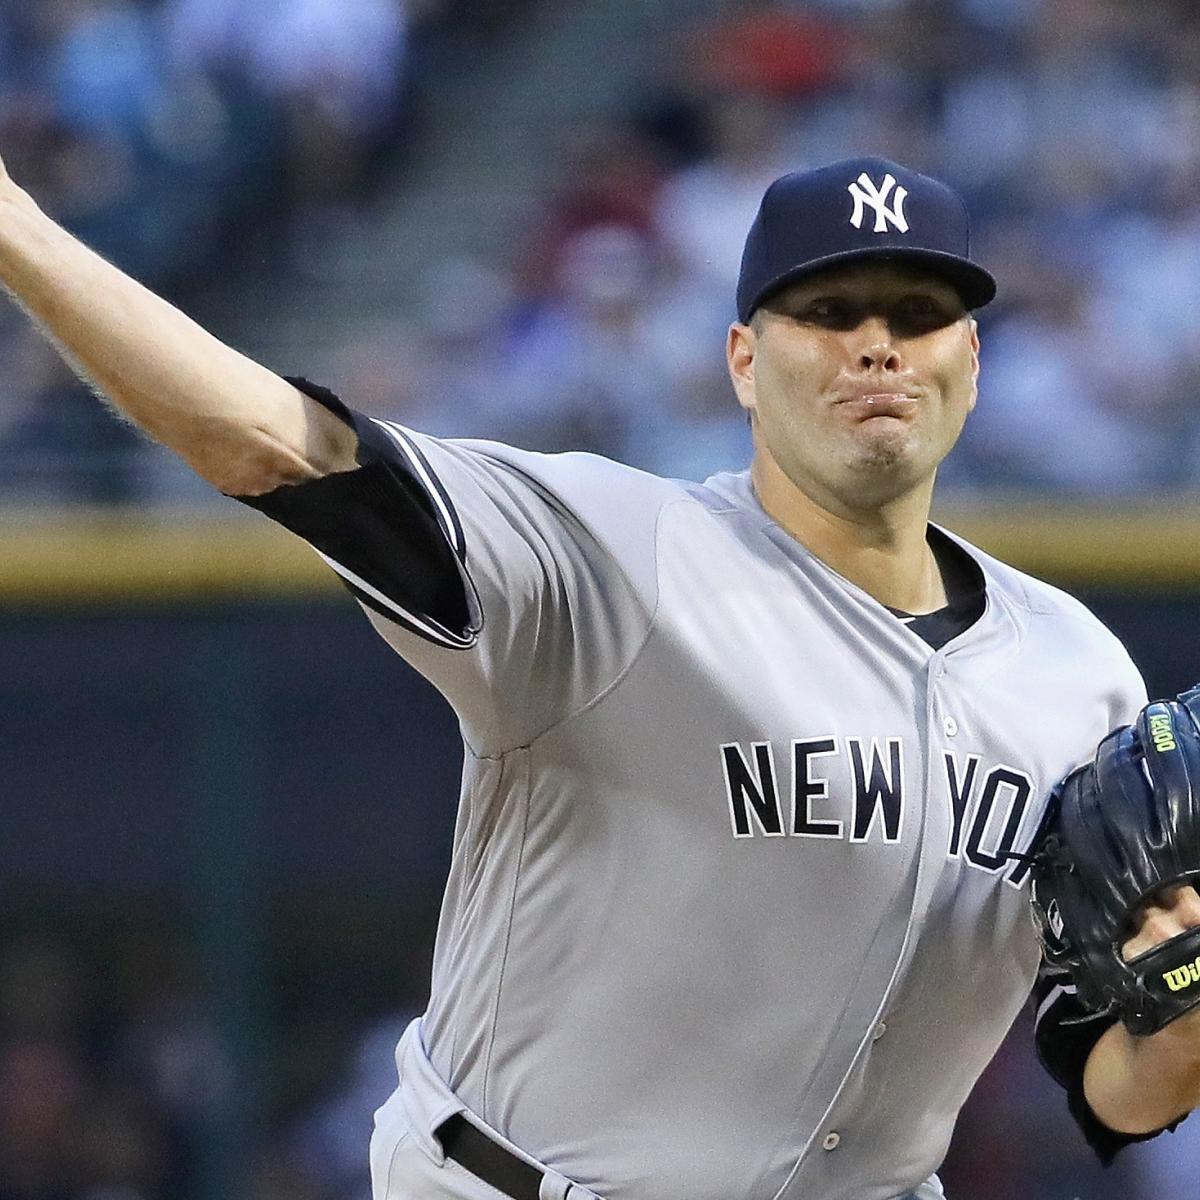 White Sox's Lance Lynn stuns MLB with epic feat vs. Mariners that's not  seen in 100 years